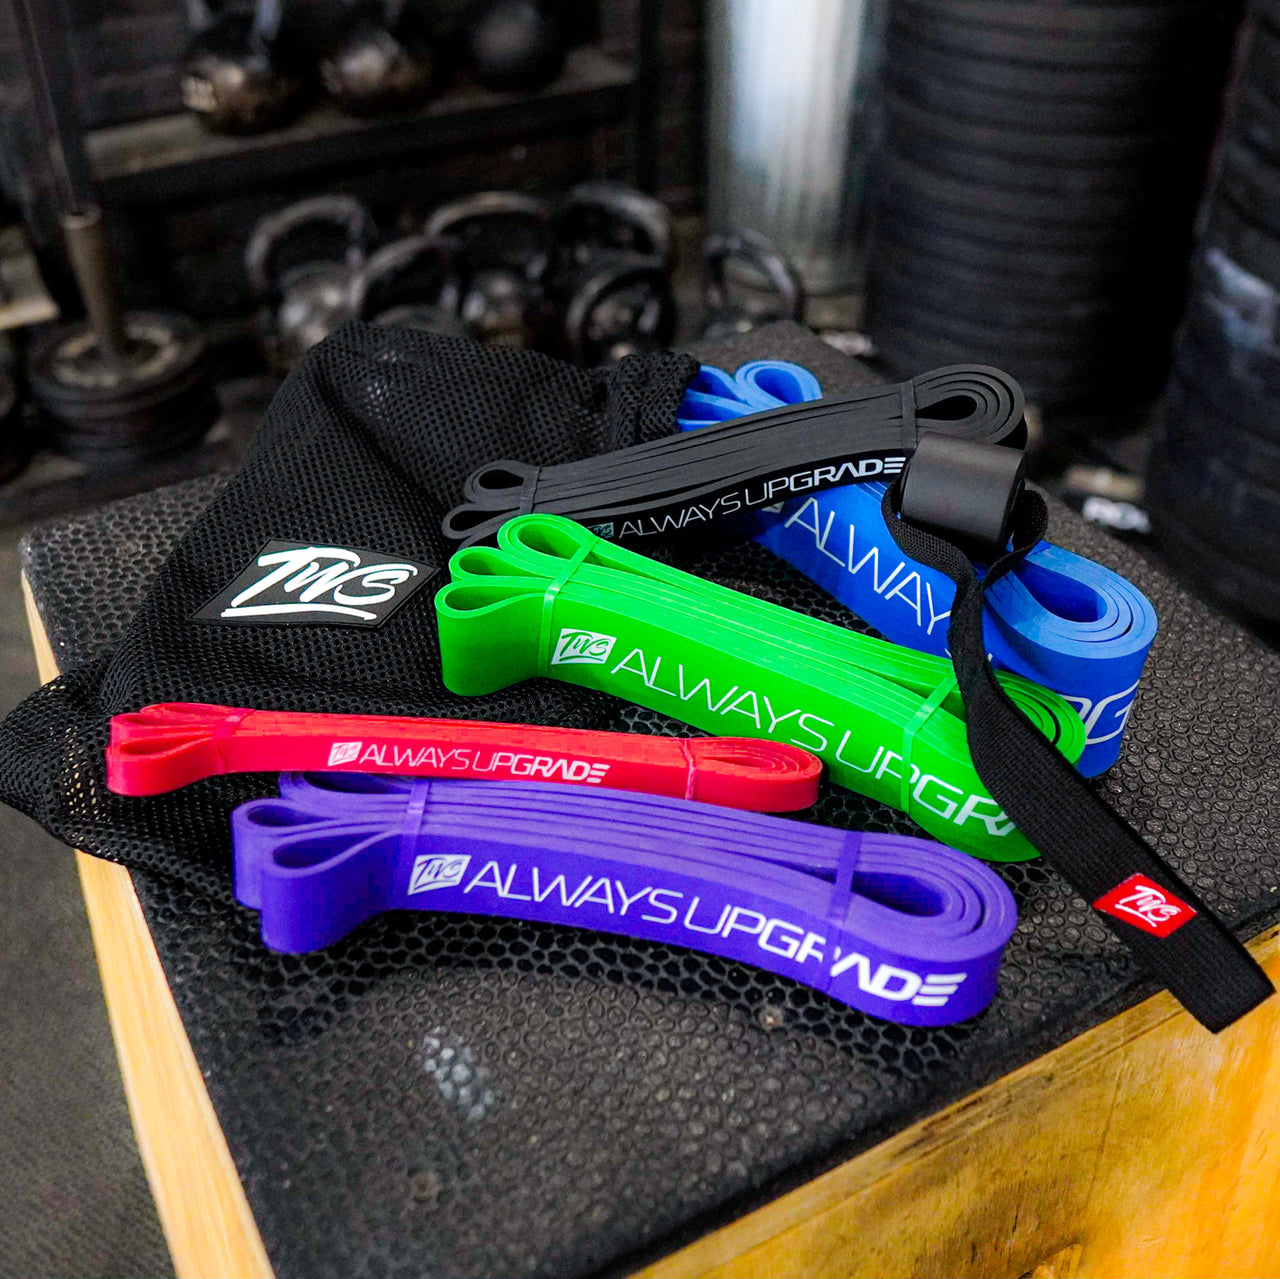 TWS Performance Bands